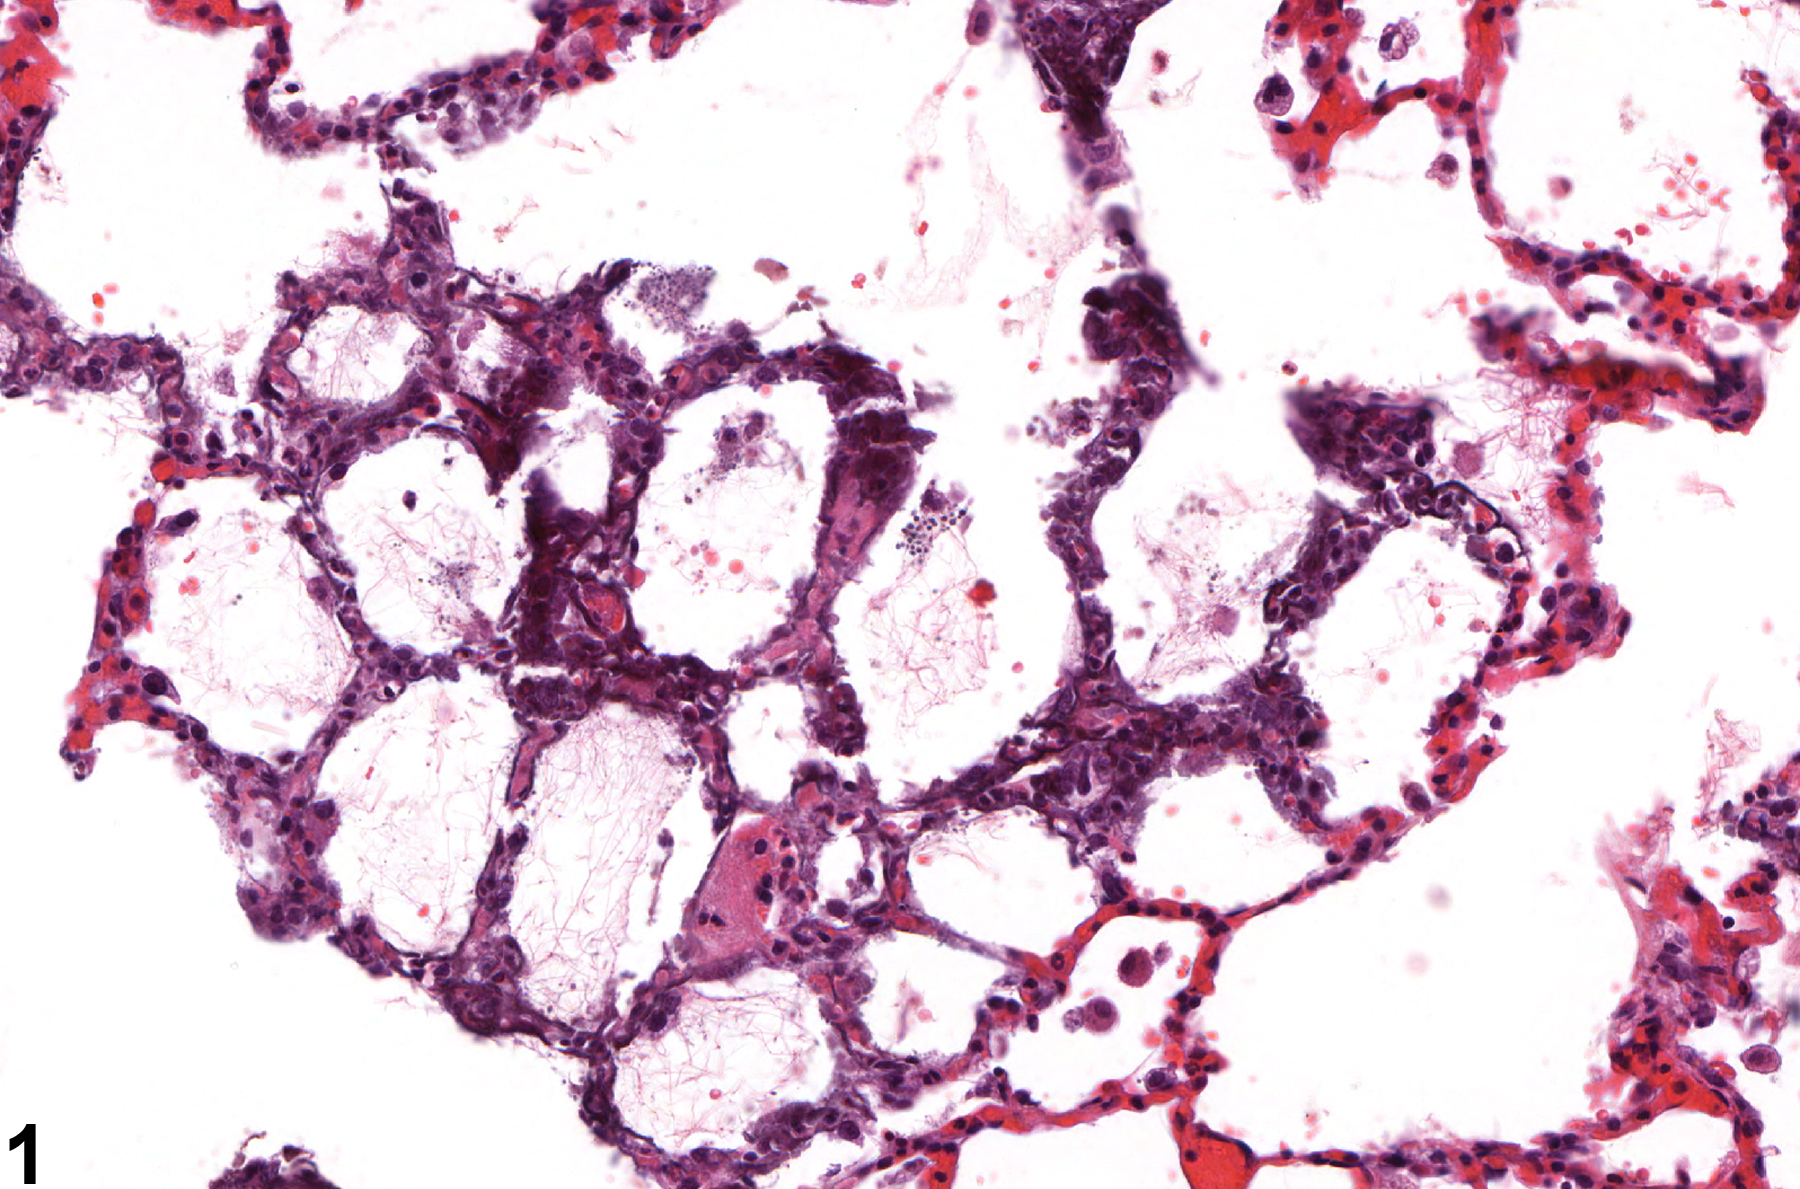 Image of interstitial mineral in the lung from a male F344/N rat in a chronic study